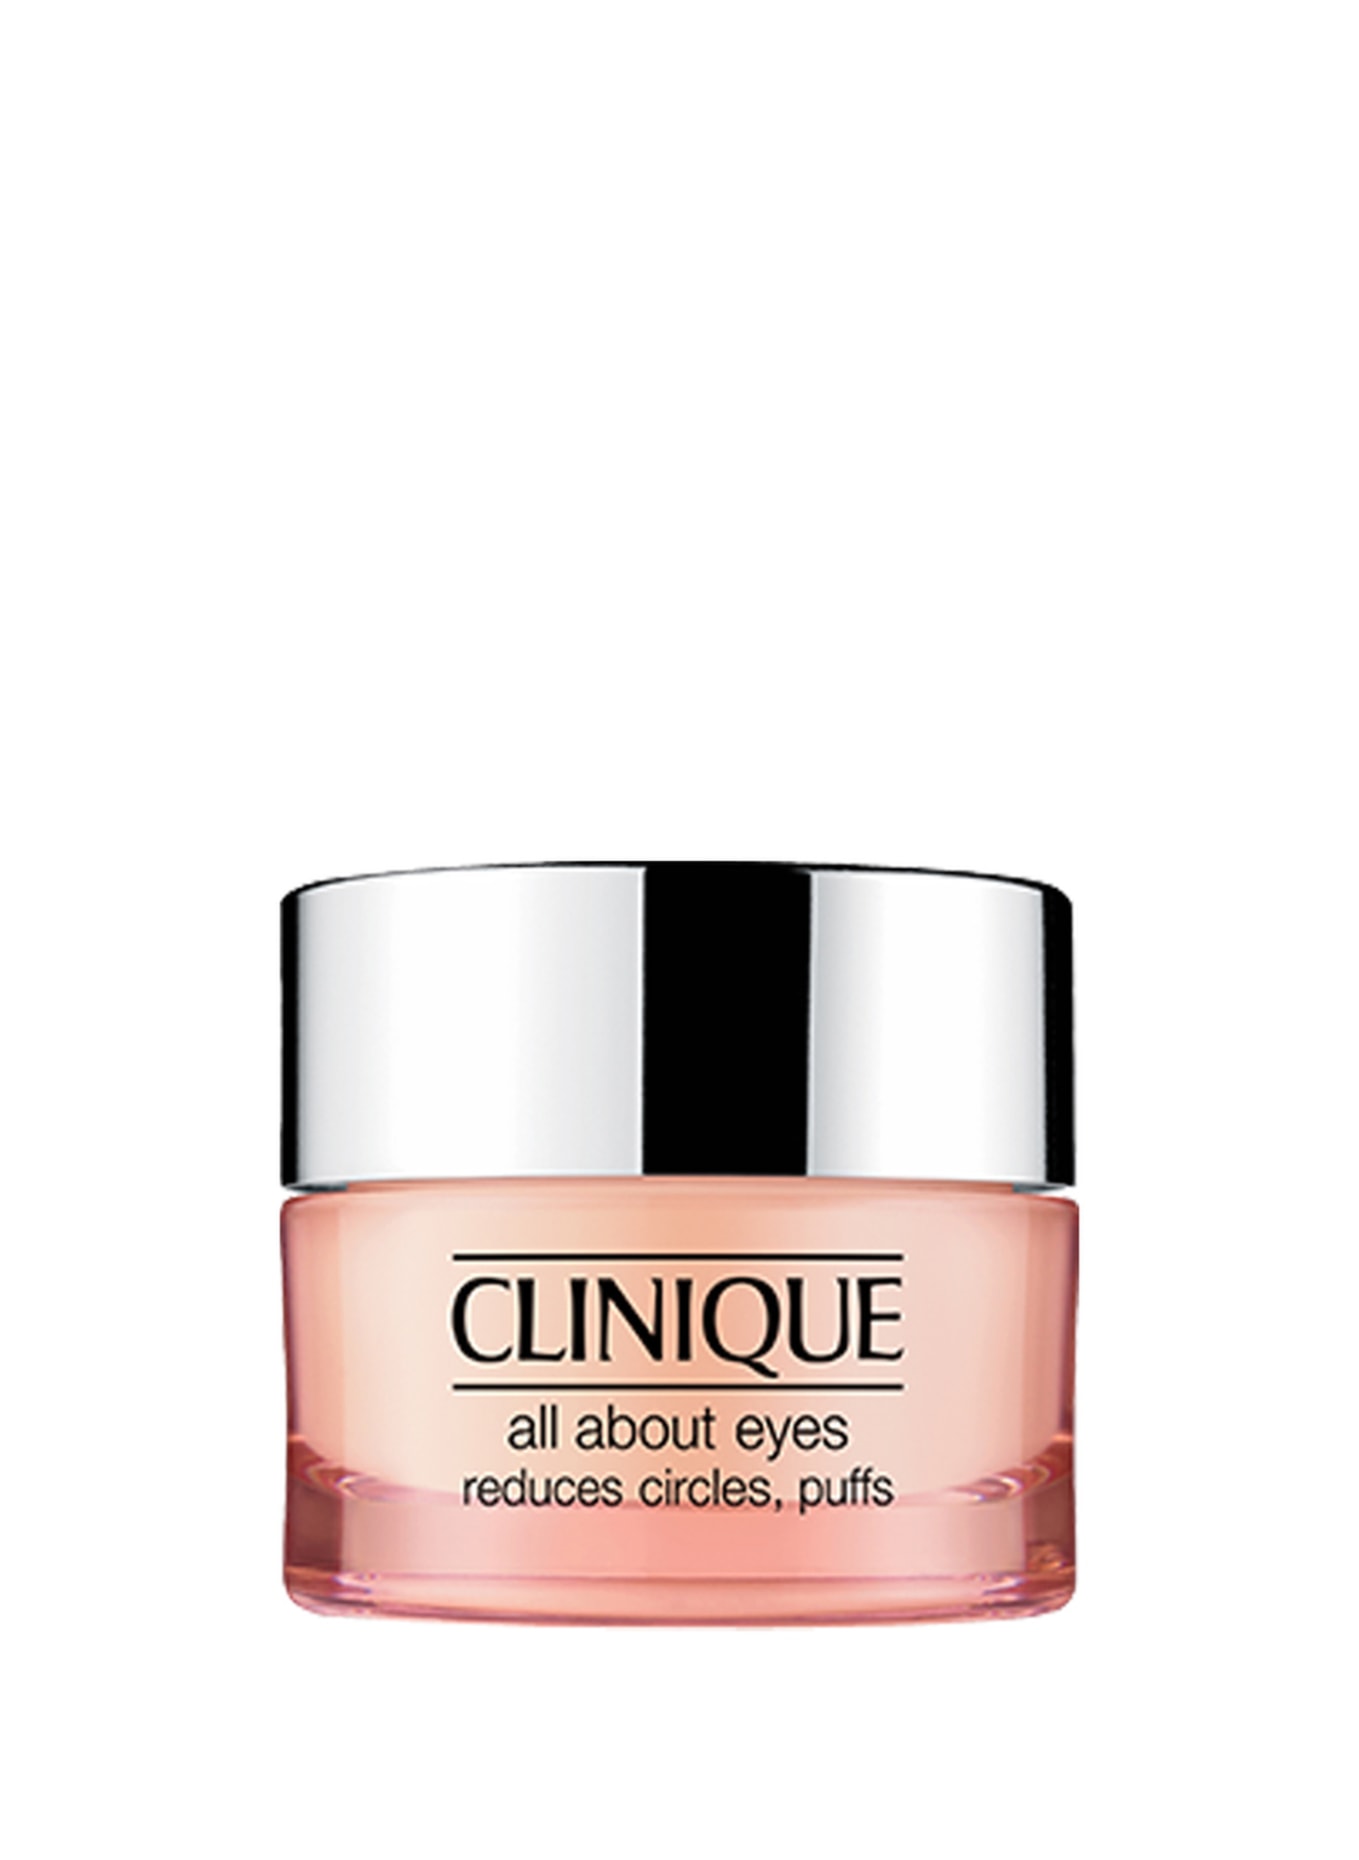 CLINIQUE ALL ABOUT EYES (Obrazek 1)